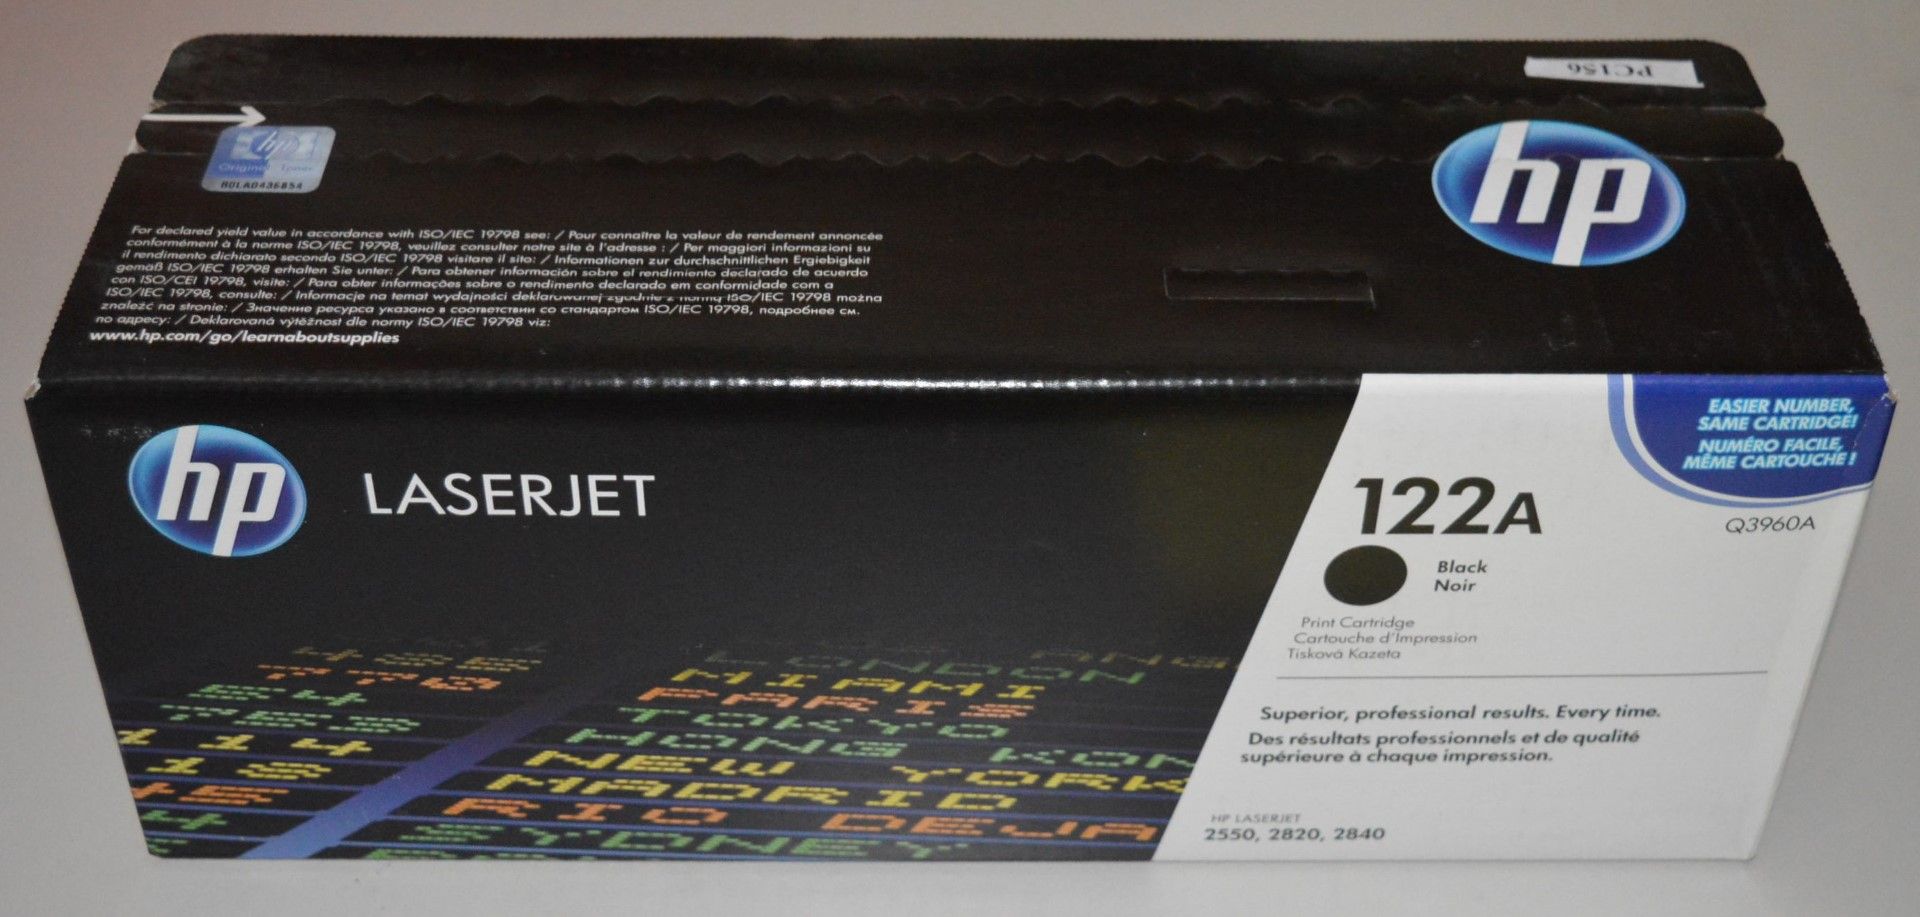 1 x Genuine HP Laserjet 122a Toner Cartridge - Type Q3960A Suitable For HP 2550, 2820 and 2840